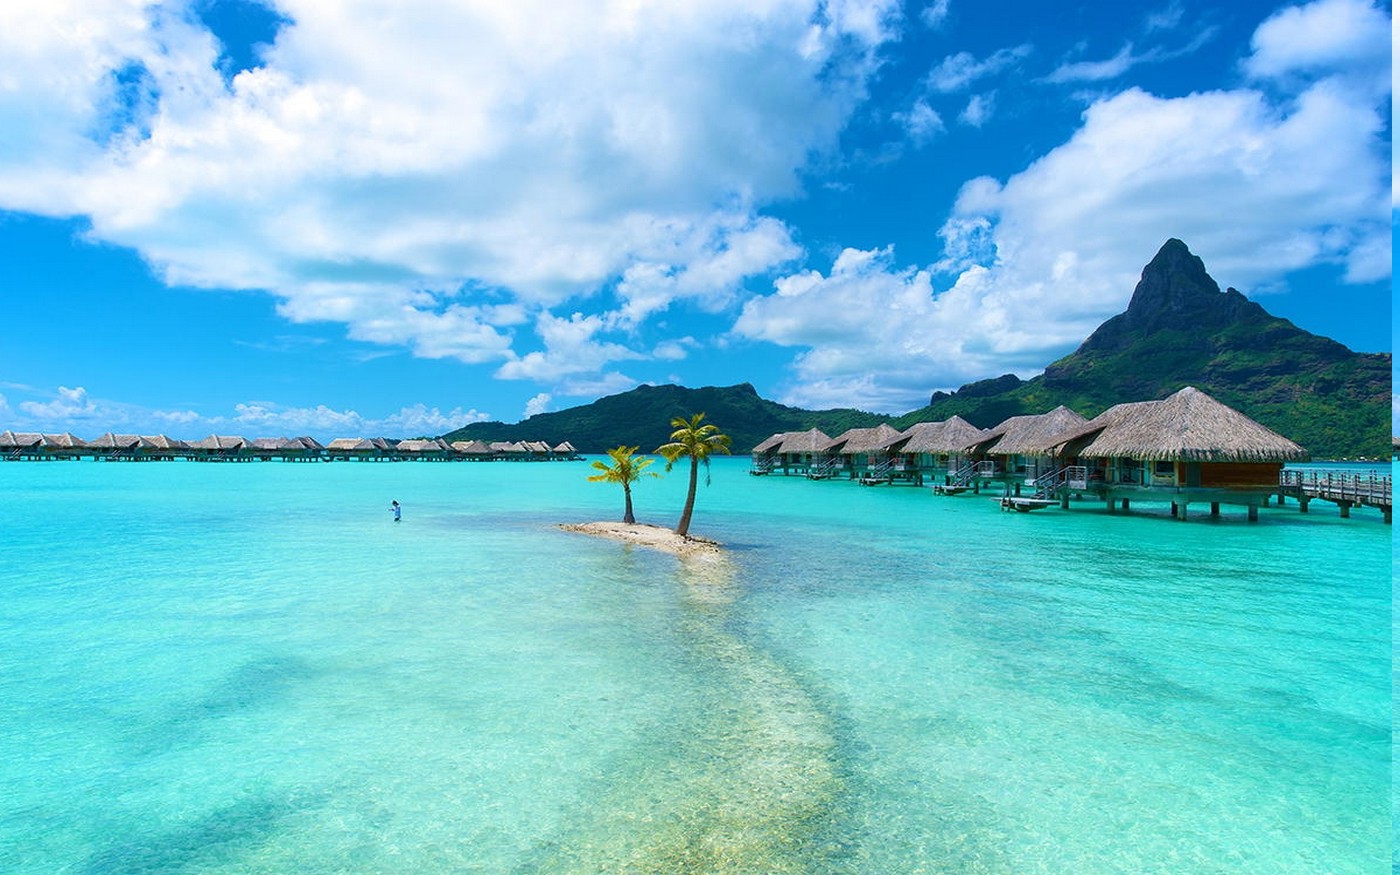 nature, Landscape, Bora Bora, Resort, Island, Tropical, Sea, Beach, Palm Trees, Clouds, Mountain, Turquoise, Water, Bungalow, Summer, Vacations Wallpaper